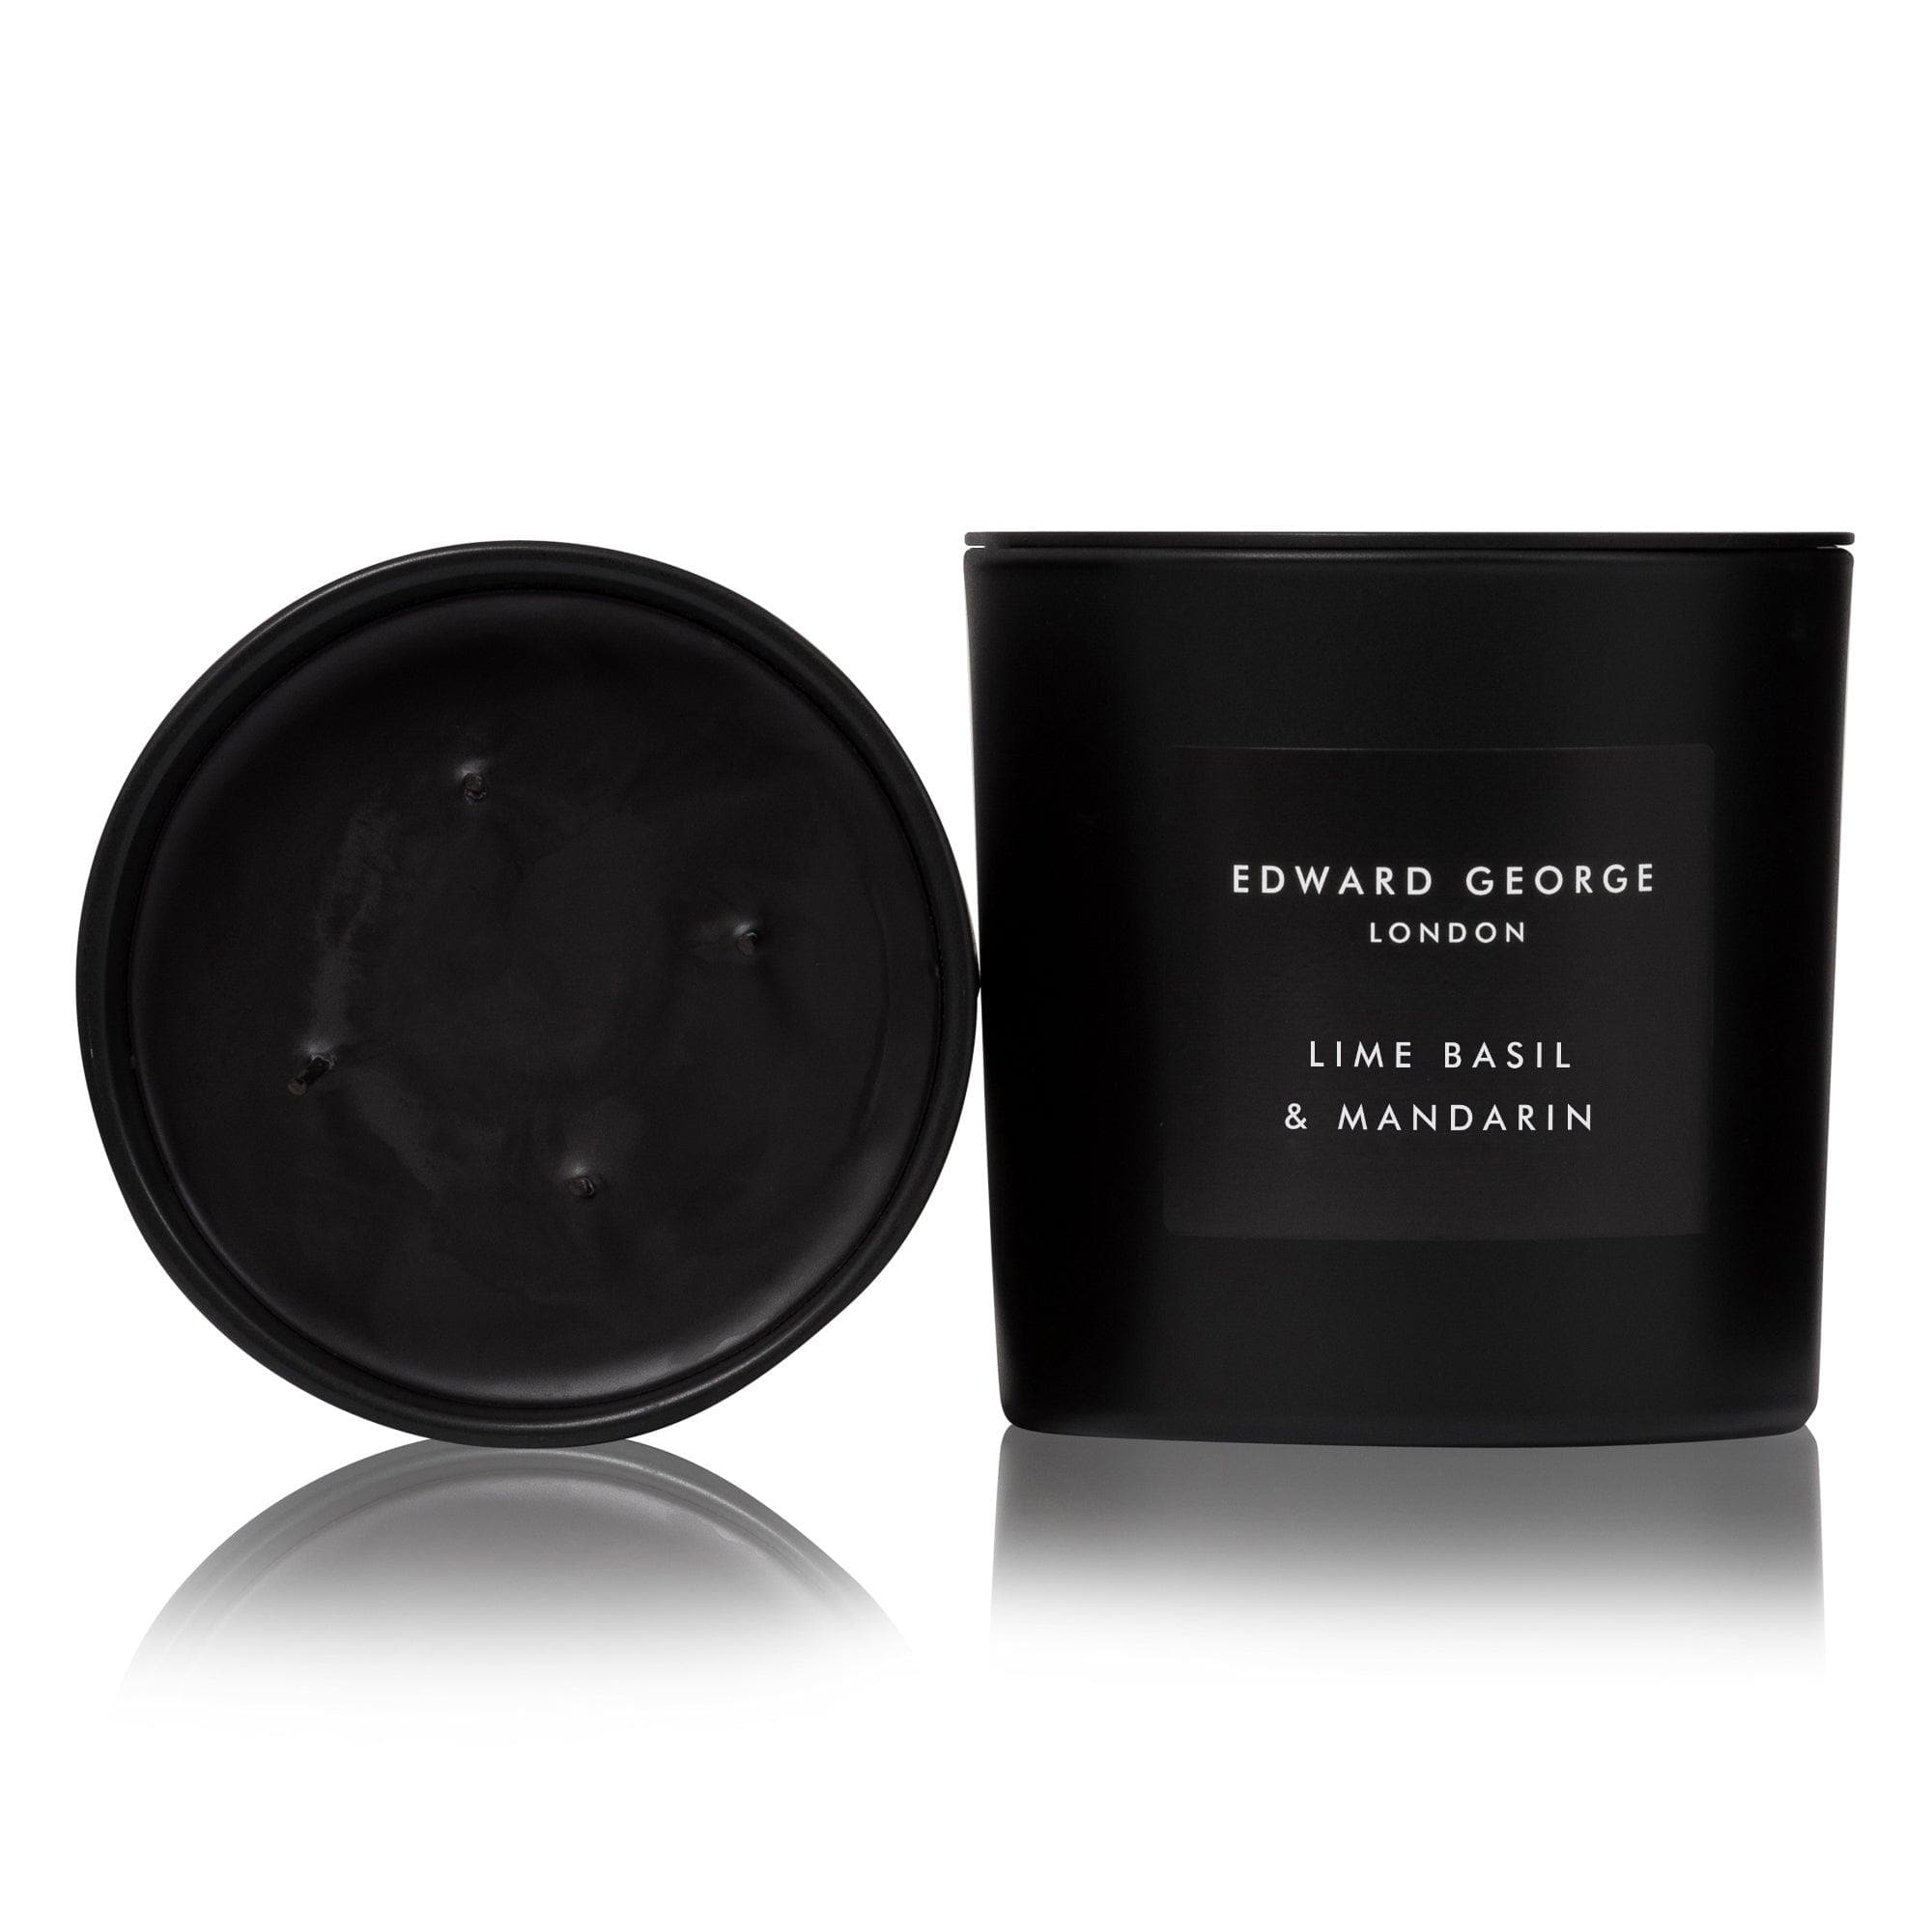 lime basil mandarin candles home fragrance decor room living edward george london luxury gift ritual scent set lid mineral best black wax scented candle women men large